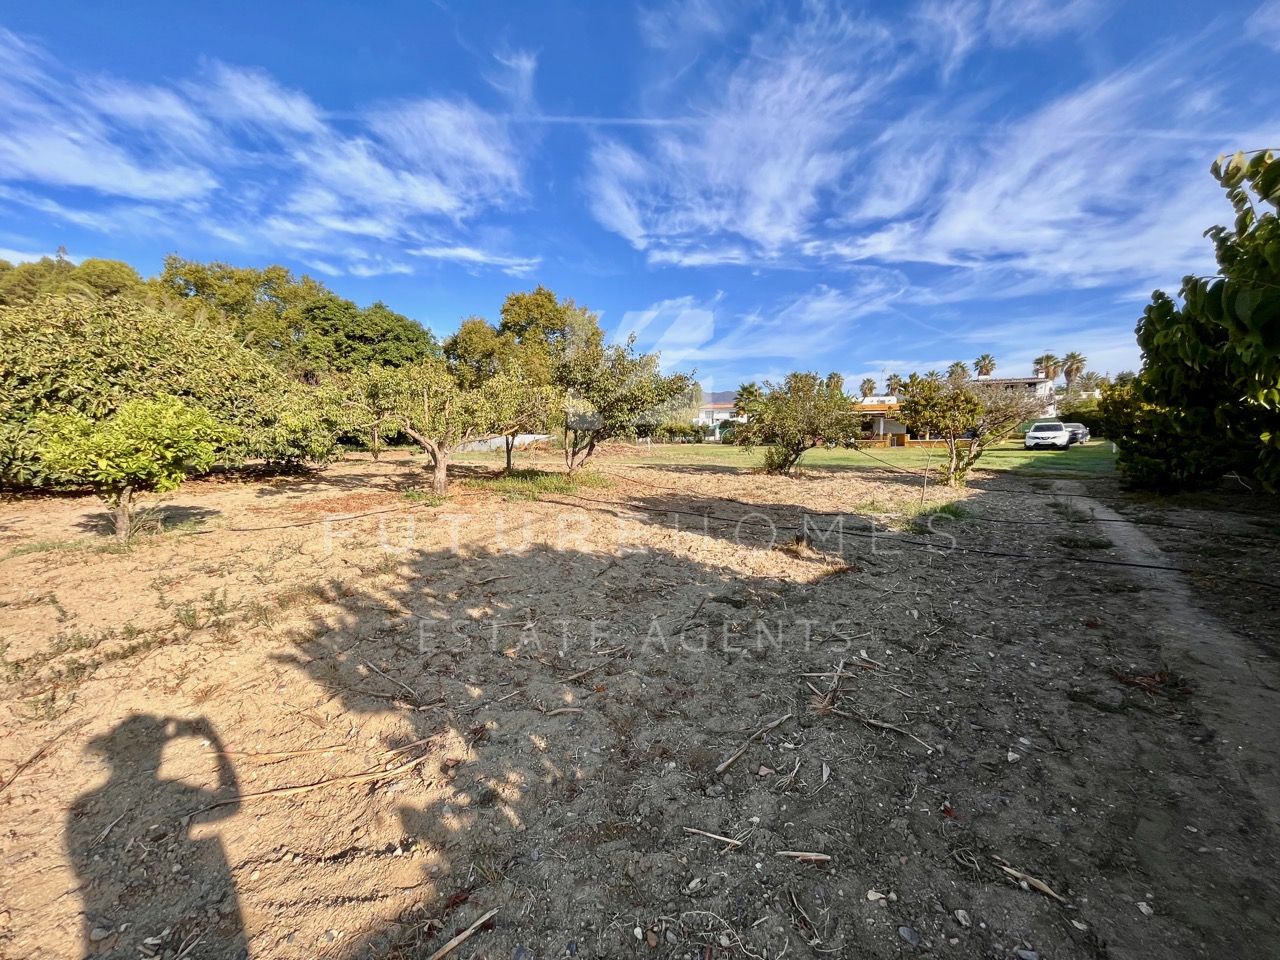 Unique opportunity to purchase large rustic flat plot only 600 metres from the beach with excellent access.